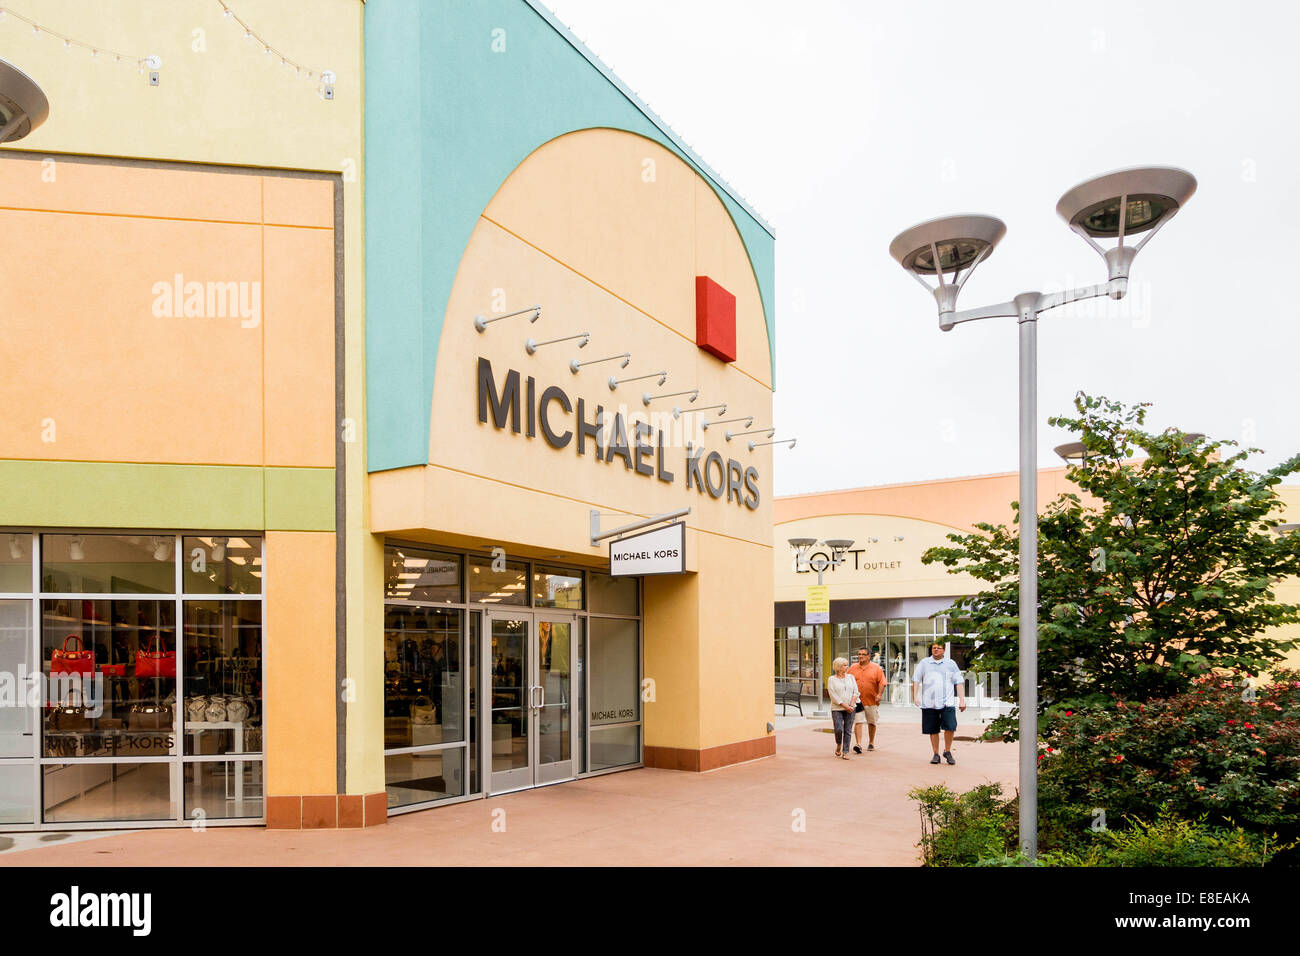 Eine Michael Kors Bekleidungsgeschäft in The Outlet Shoppes in Oklahoma City.  Oklahoma, USA, eine Factory Outlet Mall. Stockfoto